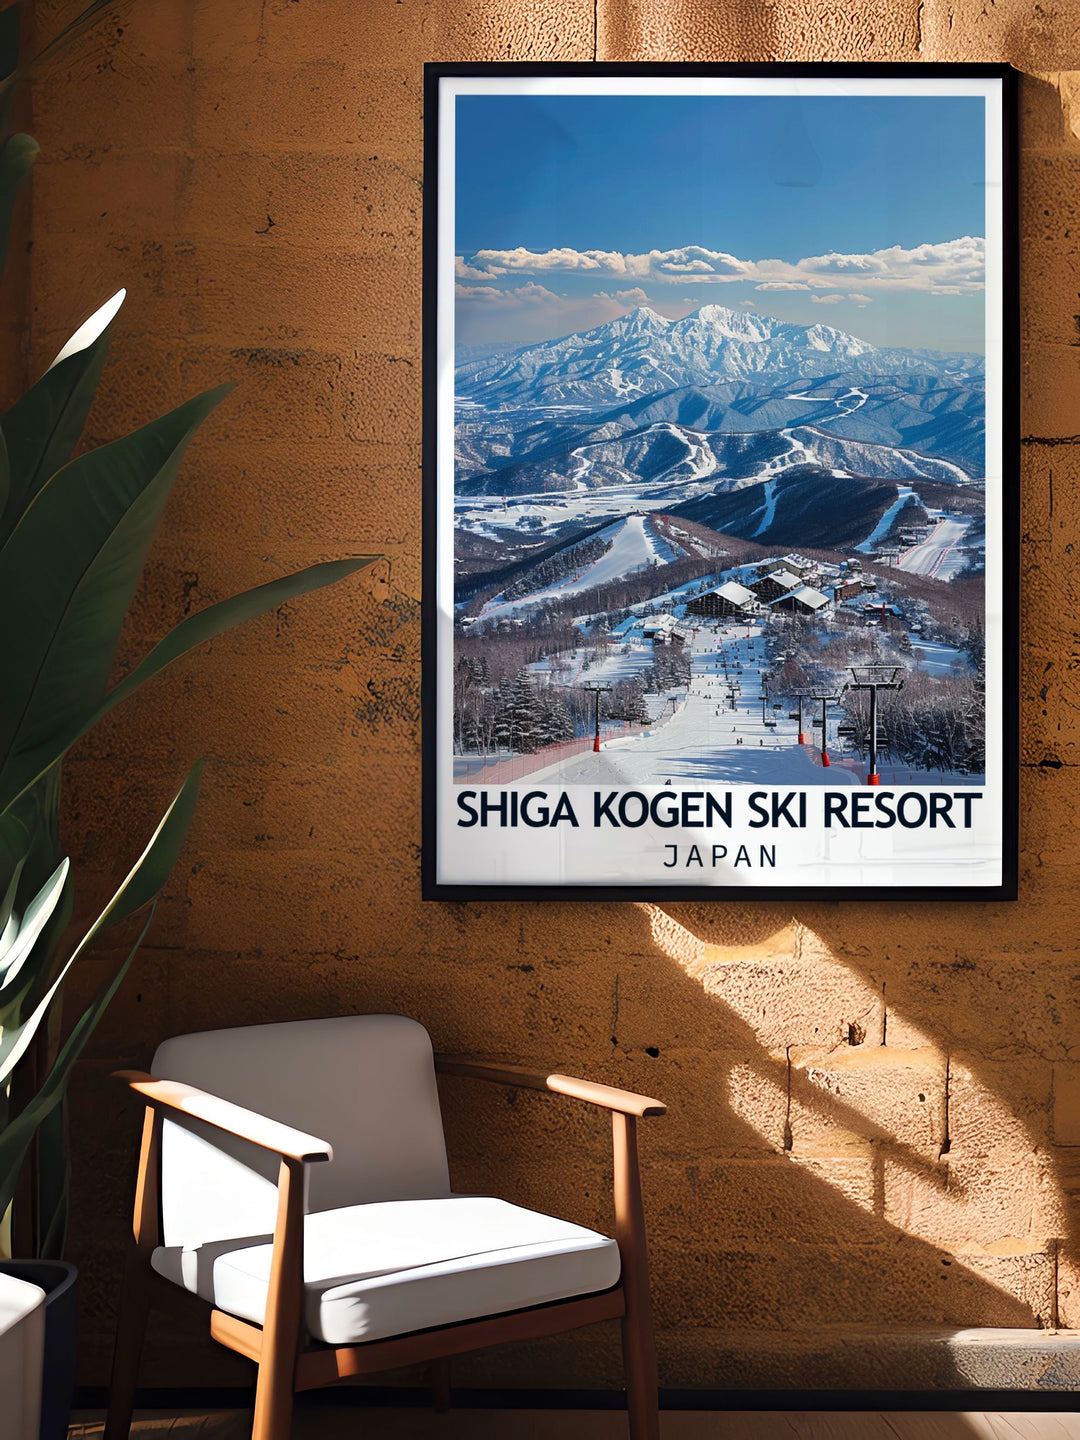 Bring the beauty of the Japanese Alps into your home with this detailed poster featuring Shiga Kogen, highlighting the vibrant winter sports culture and pristine slopes of Nagano, Japan.